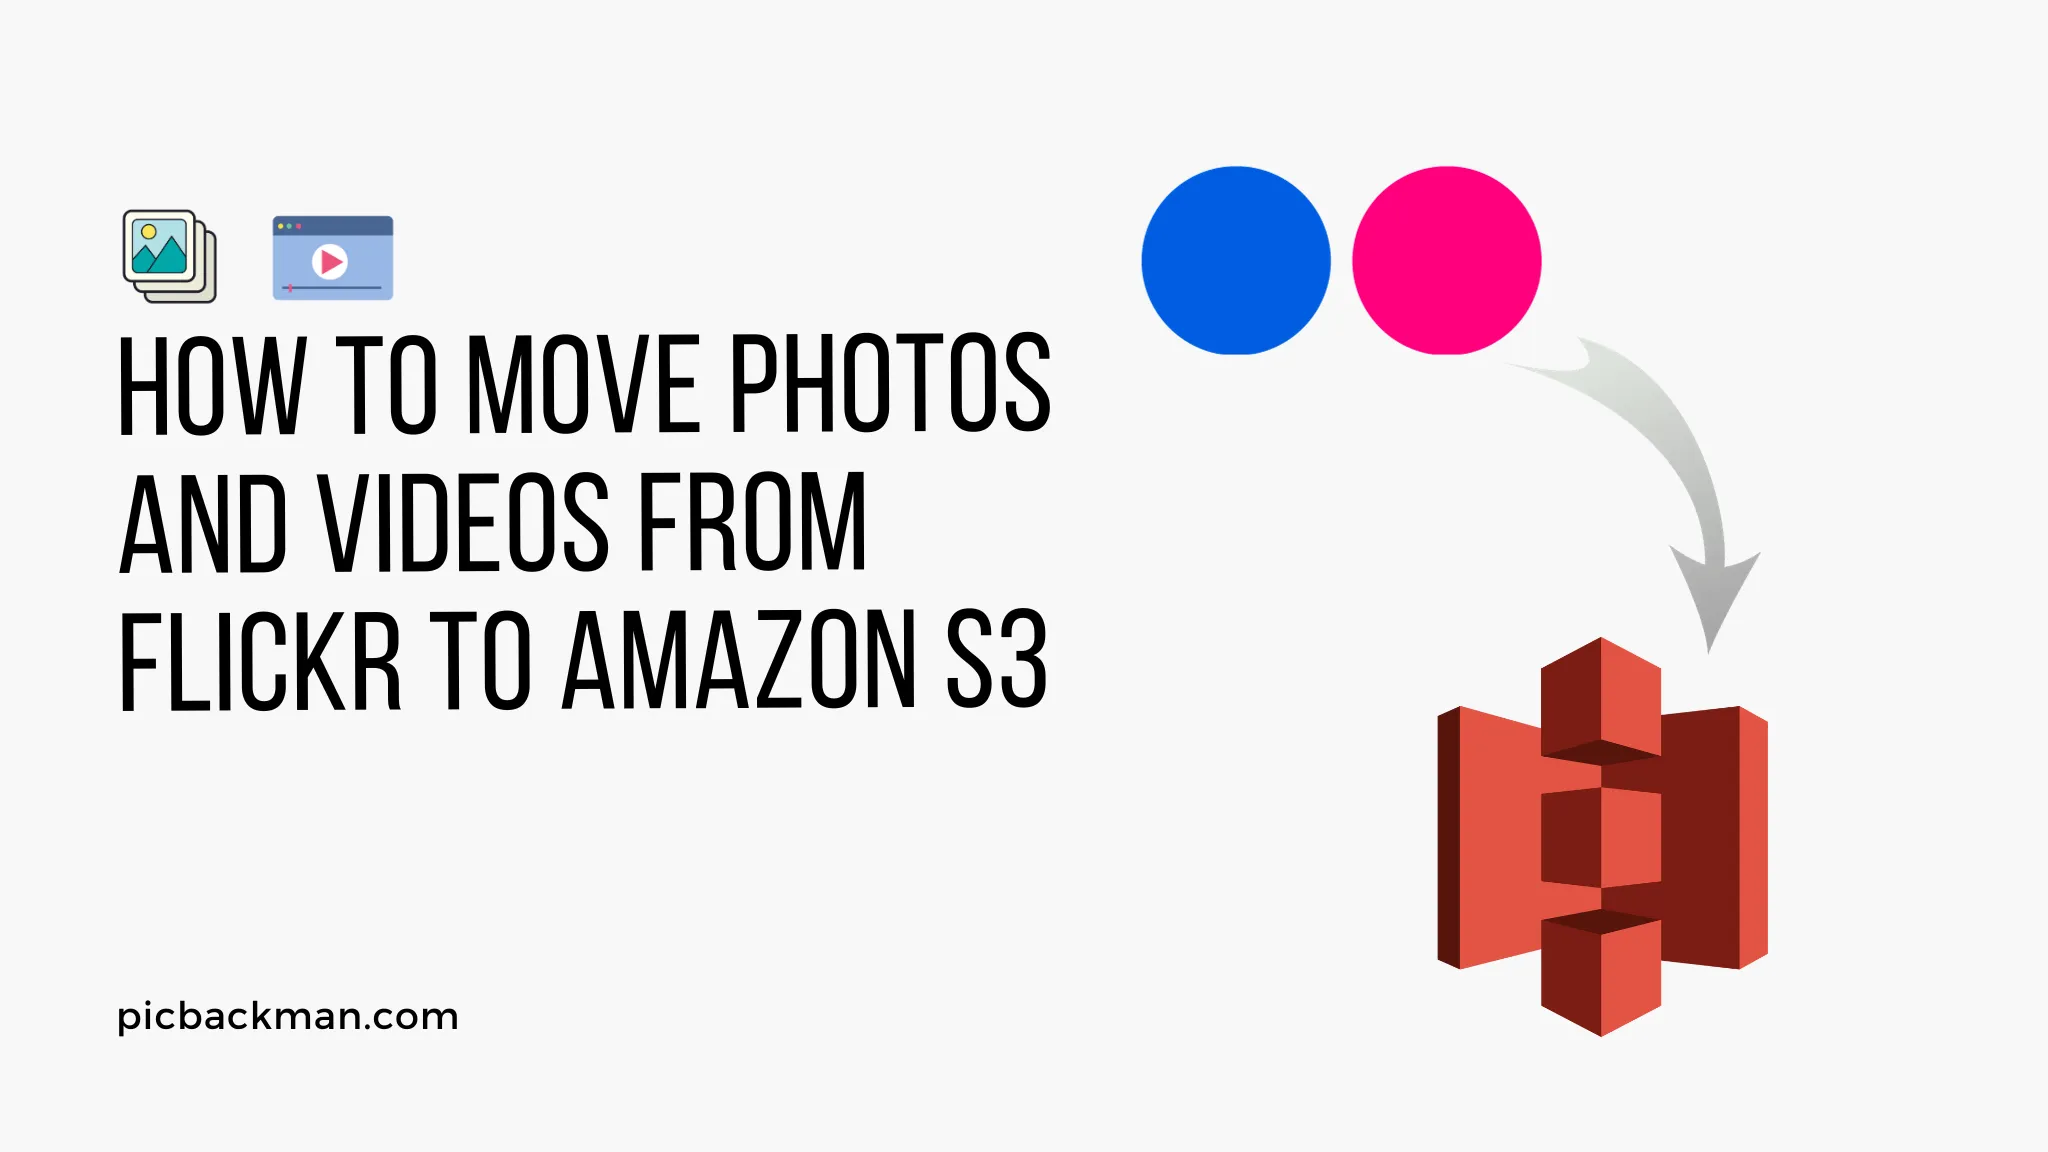 How to Move Photos and Videos from Flickr to Amazon S3